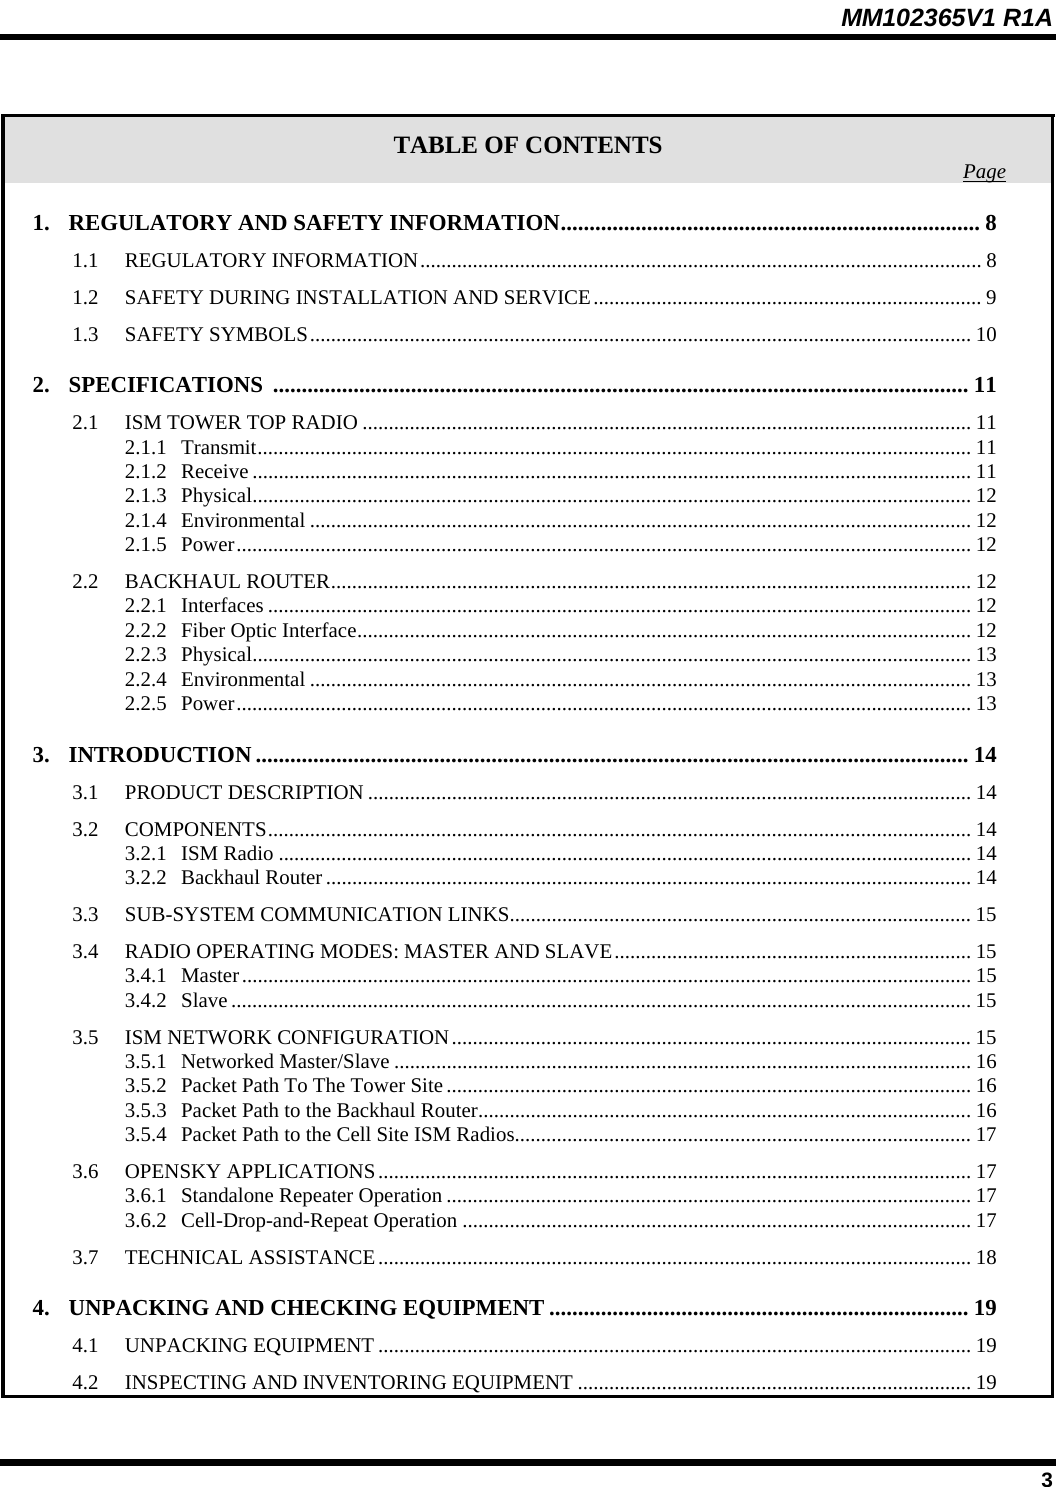 MM102365V1 R1A  TABLE OF CONTENTS  Page1. REGULATORY AND SAFETY INFORMATION......................................................................... 8 1.1 REGULATORY INFORMATION........................................................................................................... 8 1.2 SAFETY DURING INSTALLATION AND SERVICE.......................................................................... 9 1.3 SAFETY SYMBOLS.............................................................................................................................. 10 2. SPECIFICATIONS ......................................................................................................................... 11 2.1 ISM TOWER TOP RADIO .................................................................................................................... 11 2.1.1 Transmit........................................................................................................................................ 11 2.1.2 Receive ......................................................................................................................................... 11 2.1.3 Physical......................................................................................................................................... 12 2.1.4 Environmental .............................................................................................................................. 12 2.1.5 Power............................................................................................................................................ 12 2.2 BACKHAUL ROUTER.......................................................................................................................... 12 2.2.1 Interfaces ...................................................................................................................................... 12 2.2.2 Fiber Optic Interface..................................................................................................................... 12 2.2.3 Physical......................................................................................................................................... 13 2.2.4 Environmental .............................................................................................................................. 13 2.2.5 Power............................................................................................................................................ 13 3. INTRODUCTION ............................................................................................................................ 14 3.1 PRODUCT DESCRIPTION ................................................................................................................... 14 3.2 COMPONENTS...................................................................................................................................... 14 3.2.1 ISM Radio .................................................................................................................................... 14 3.2.2 Backhaul Router ........................................................................................................................... 14 3.3 SUB-SYSTEM COMMUNICATION LINKS........................................................................................ 15 3.4 RADIO OPERATING MODES: MASTER AND SLAVE.................................................................... 15 3.4.1 Master........................................................................................................................................... 15 3.4.2 Slave ............................................................................................................................................. 15 3.5 ISM NETWORK CONFIGURATION................................................................................................... 15 3.5.1 Networked Master/Slave .............................................................................................................. 16 3.5.2 Packet Path To The Tower Site.................................................................................................... 16 3.5.3 Packet Path to the Backhaul Router..............................................................................................16 3.5.4 Packet Path to the Cell Site ISM Radios....................................................................................... 17 3.6 OPENSKY APPLICATIONS................................................................................................................. 17 3.6.1 Standalone Repeater Operation .................................................................................................... 17 3.6.2 Cell-Drop-and-Repeat Operation ................................................................................................. 17 3.7 TECHNICAL ASSISTANCE................................................................................................................. 18 4. UNPACKING AND CHECKING EQUIPMENT ......................................................................... 19 4.1 UNPACKING EQUIPMENT ................................................................................................................. 19 4.2 INSPECTING AND INVENTORING EQUIPMENT ........................................................................... 19  3 